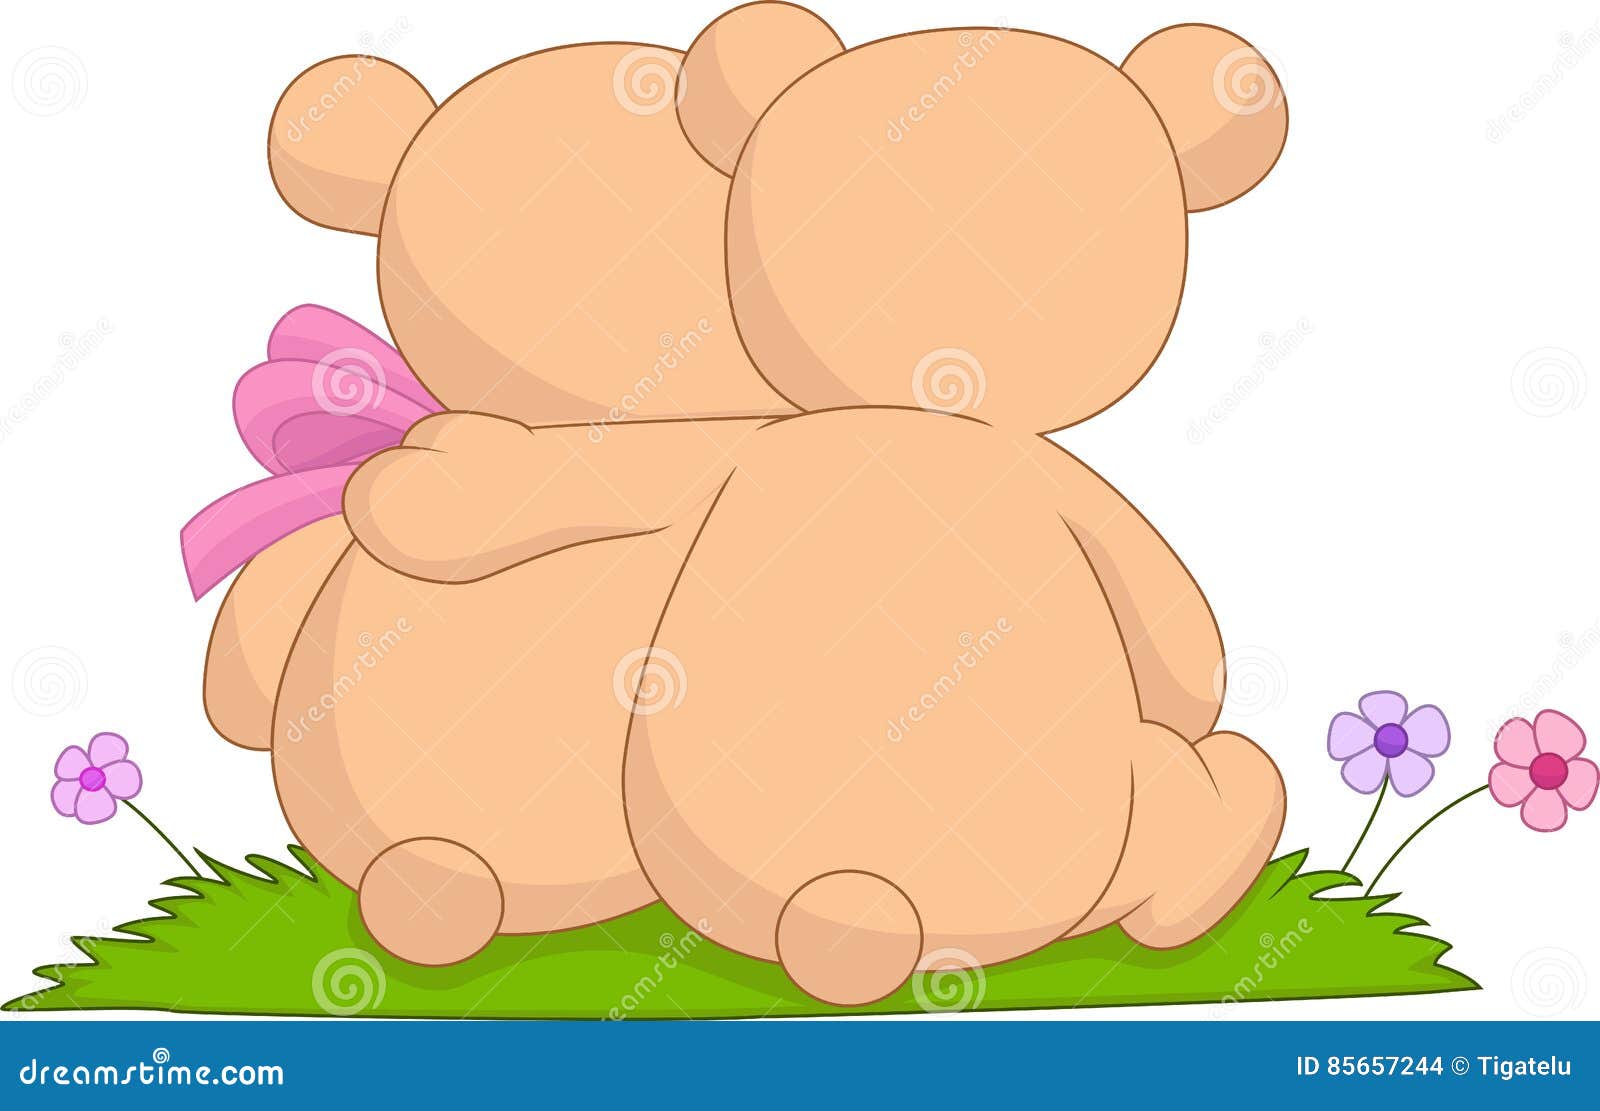 Cartoon Couple of Hugging Bears Stock Vector - Illustration of lover, male:  85657244